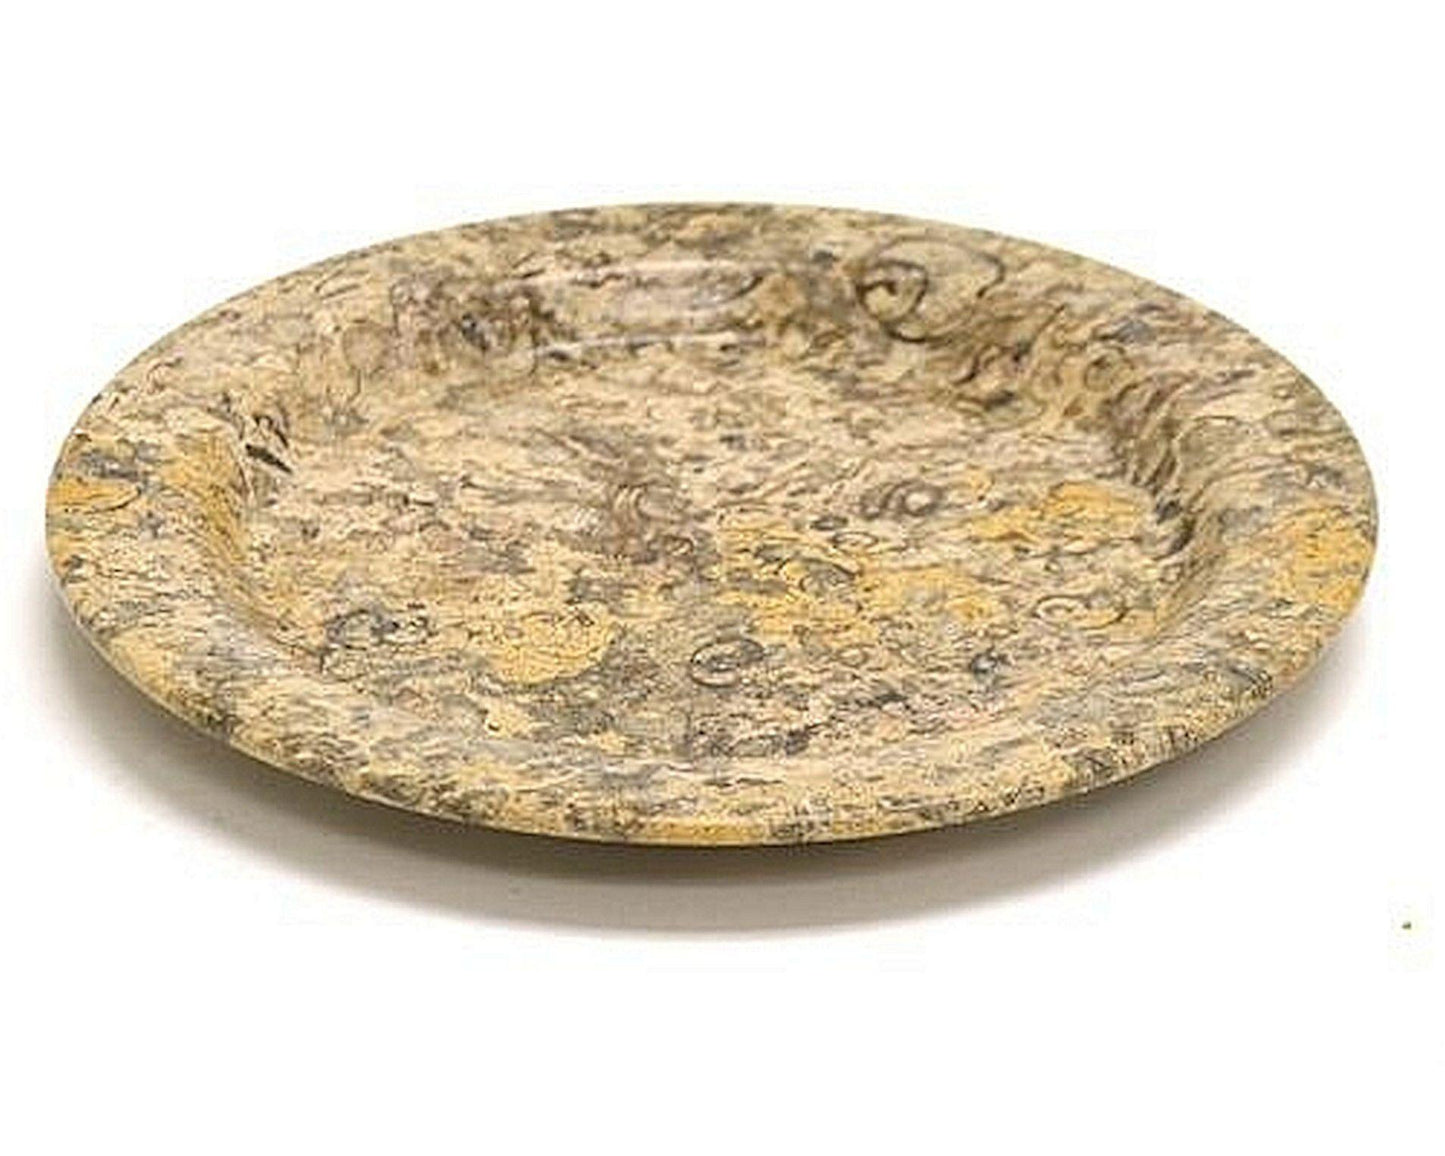 Decorative Plate of Fossil Stone | 6-inch Round - Nature Home Decor